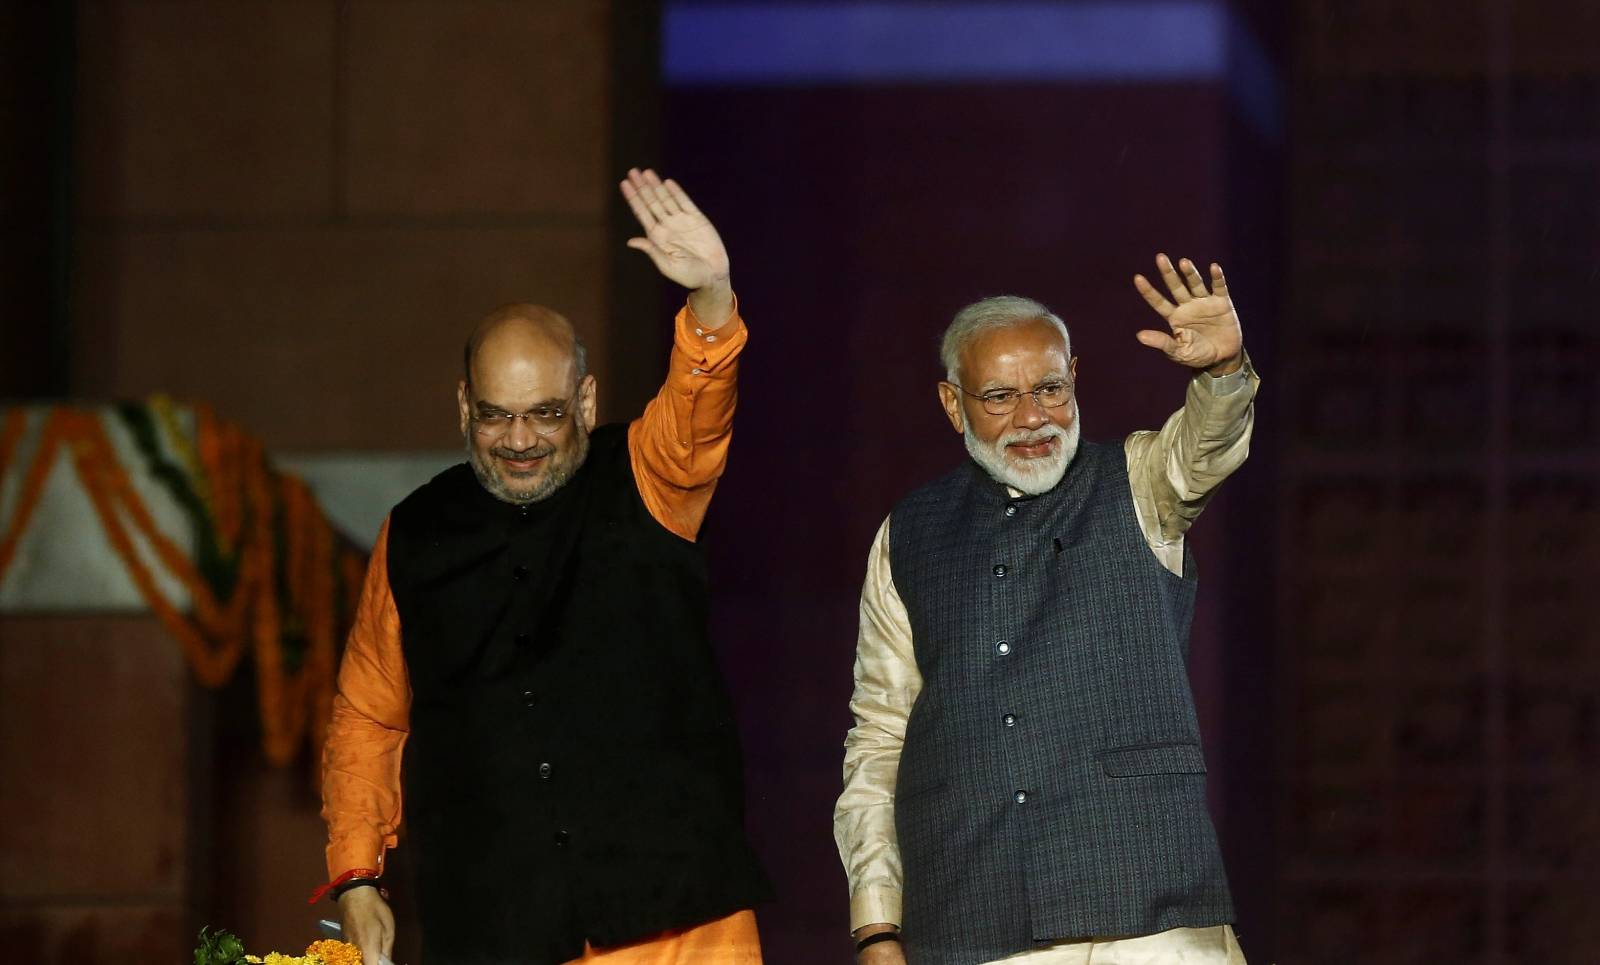 Indian Prime Minister Narendra Modi and Bharatiya Janata Party (BJP) President Amit Shah wave towards their supporters after the election results at party headquarter in New Delhi